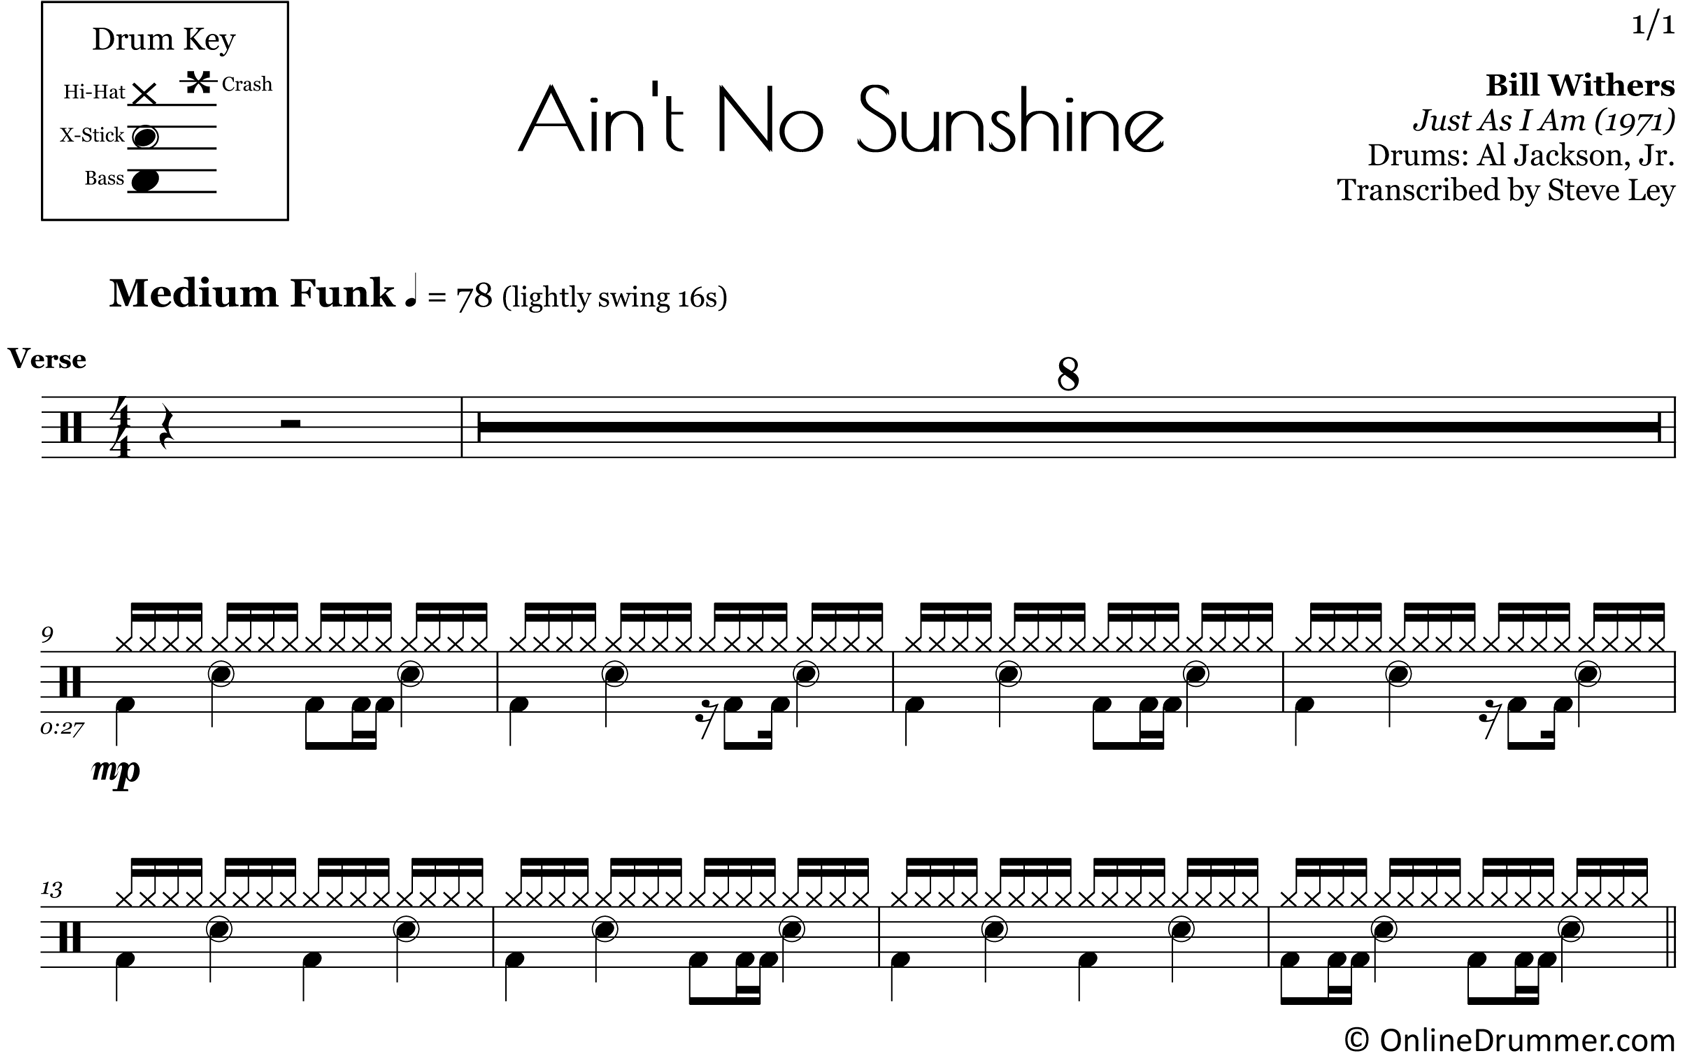 Ain't No Sunshine - Bill Withers - Drum Sheet Music